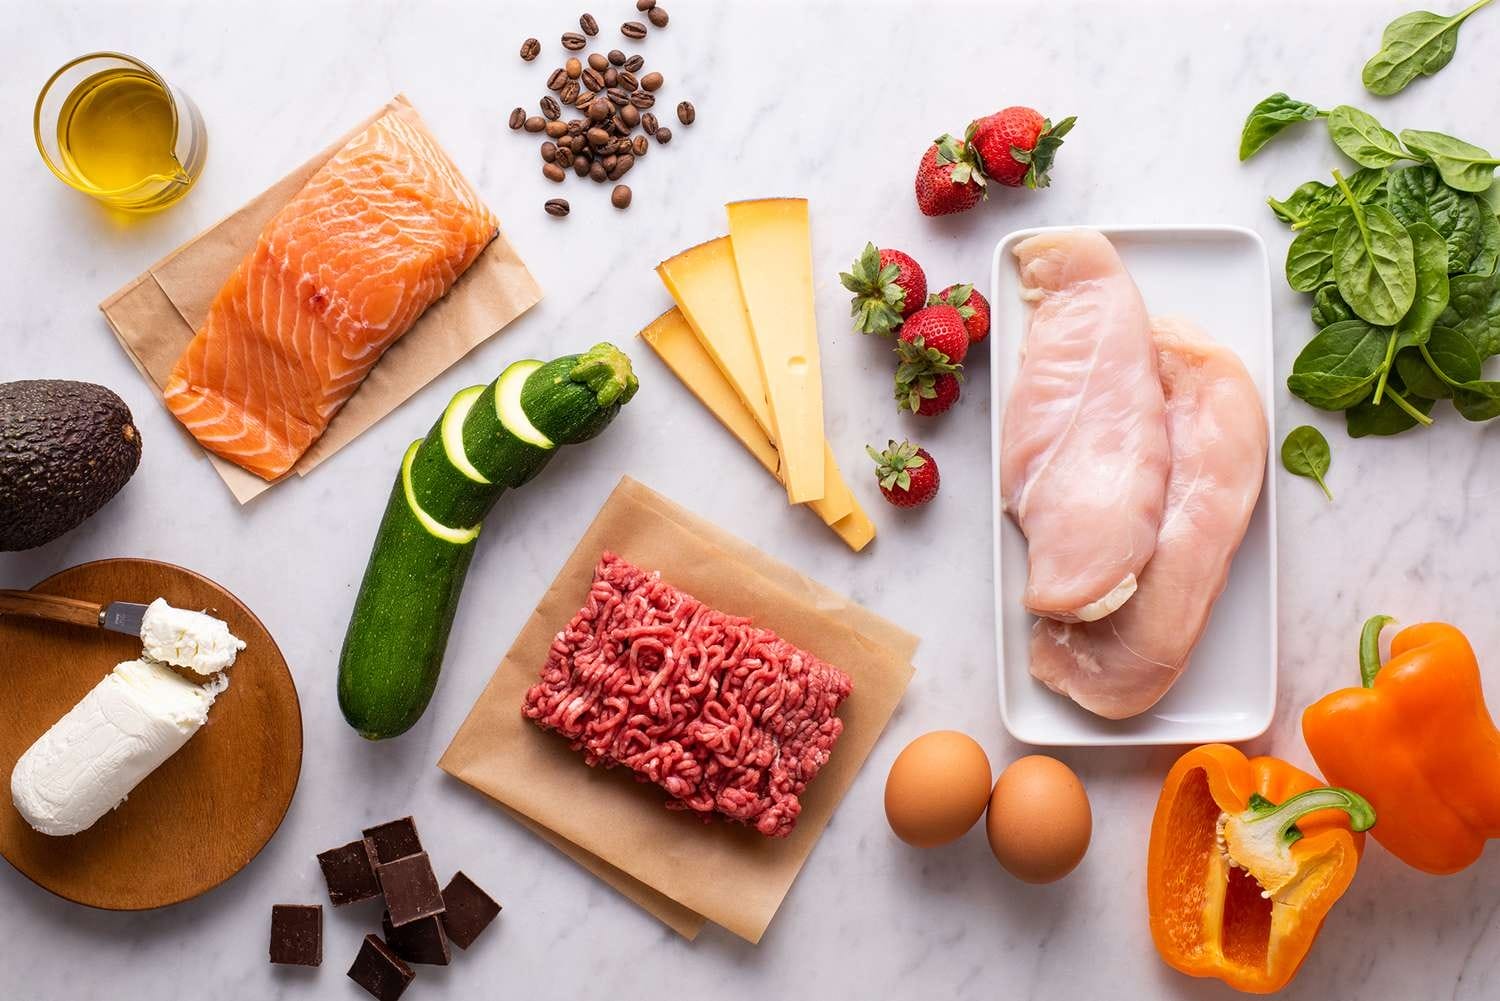 What Can You Eat On A Ketogenic Diet? Learn Questions, Answers & Recipes